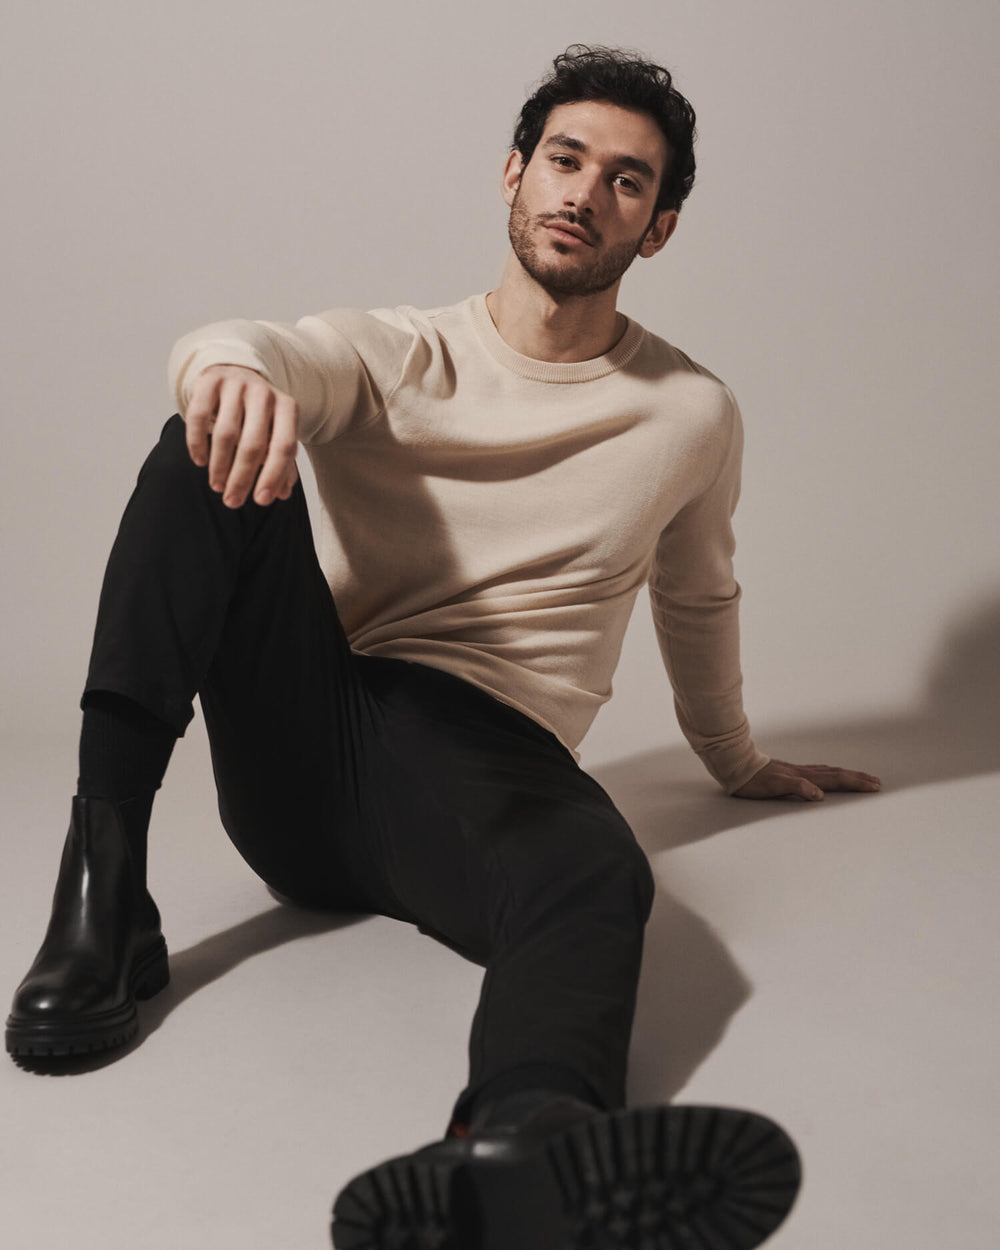 Model wearing our unisex extra-fine merino wool crew neck jumper in desert sand, made from a lightweight fabric and reactive natural fibre. Ideal for layering under our waterproof dry robes for smart city commute attire. The perfect addition to any minimalist capsule wardrobe.